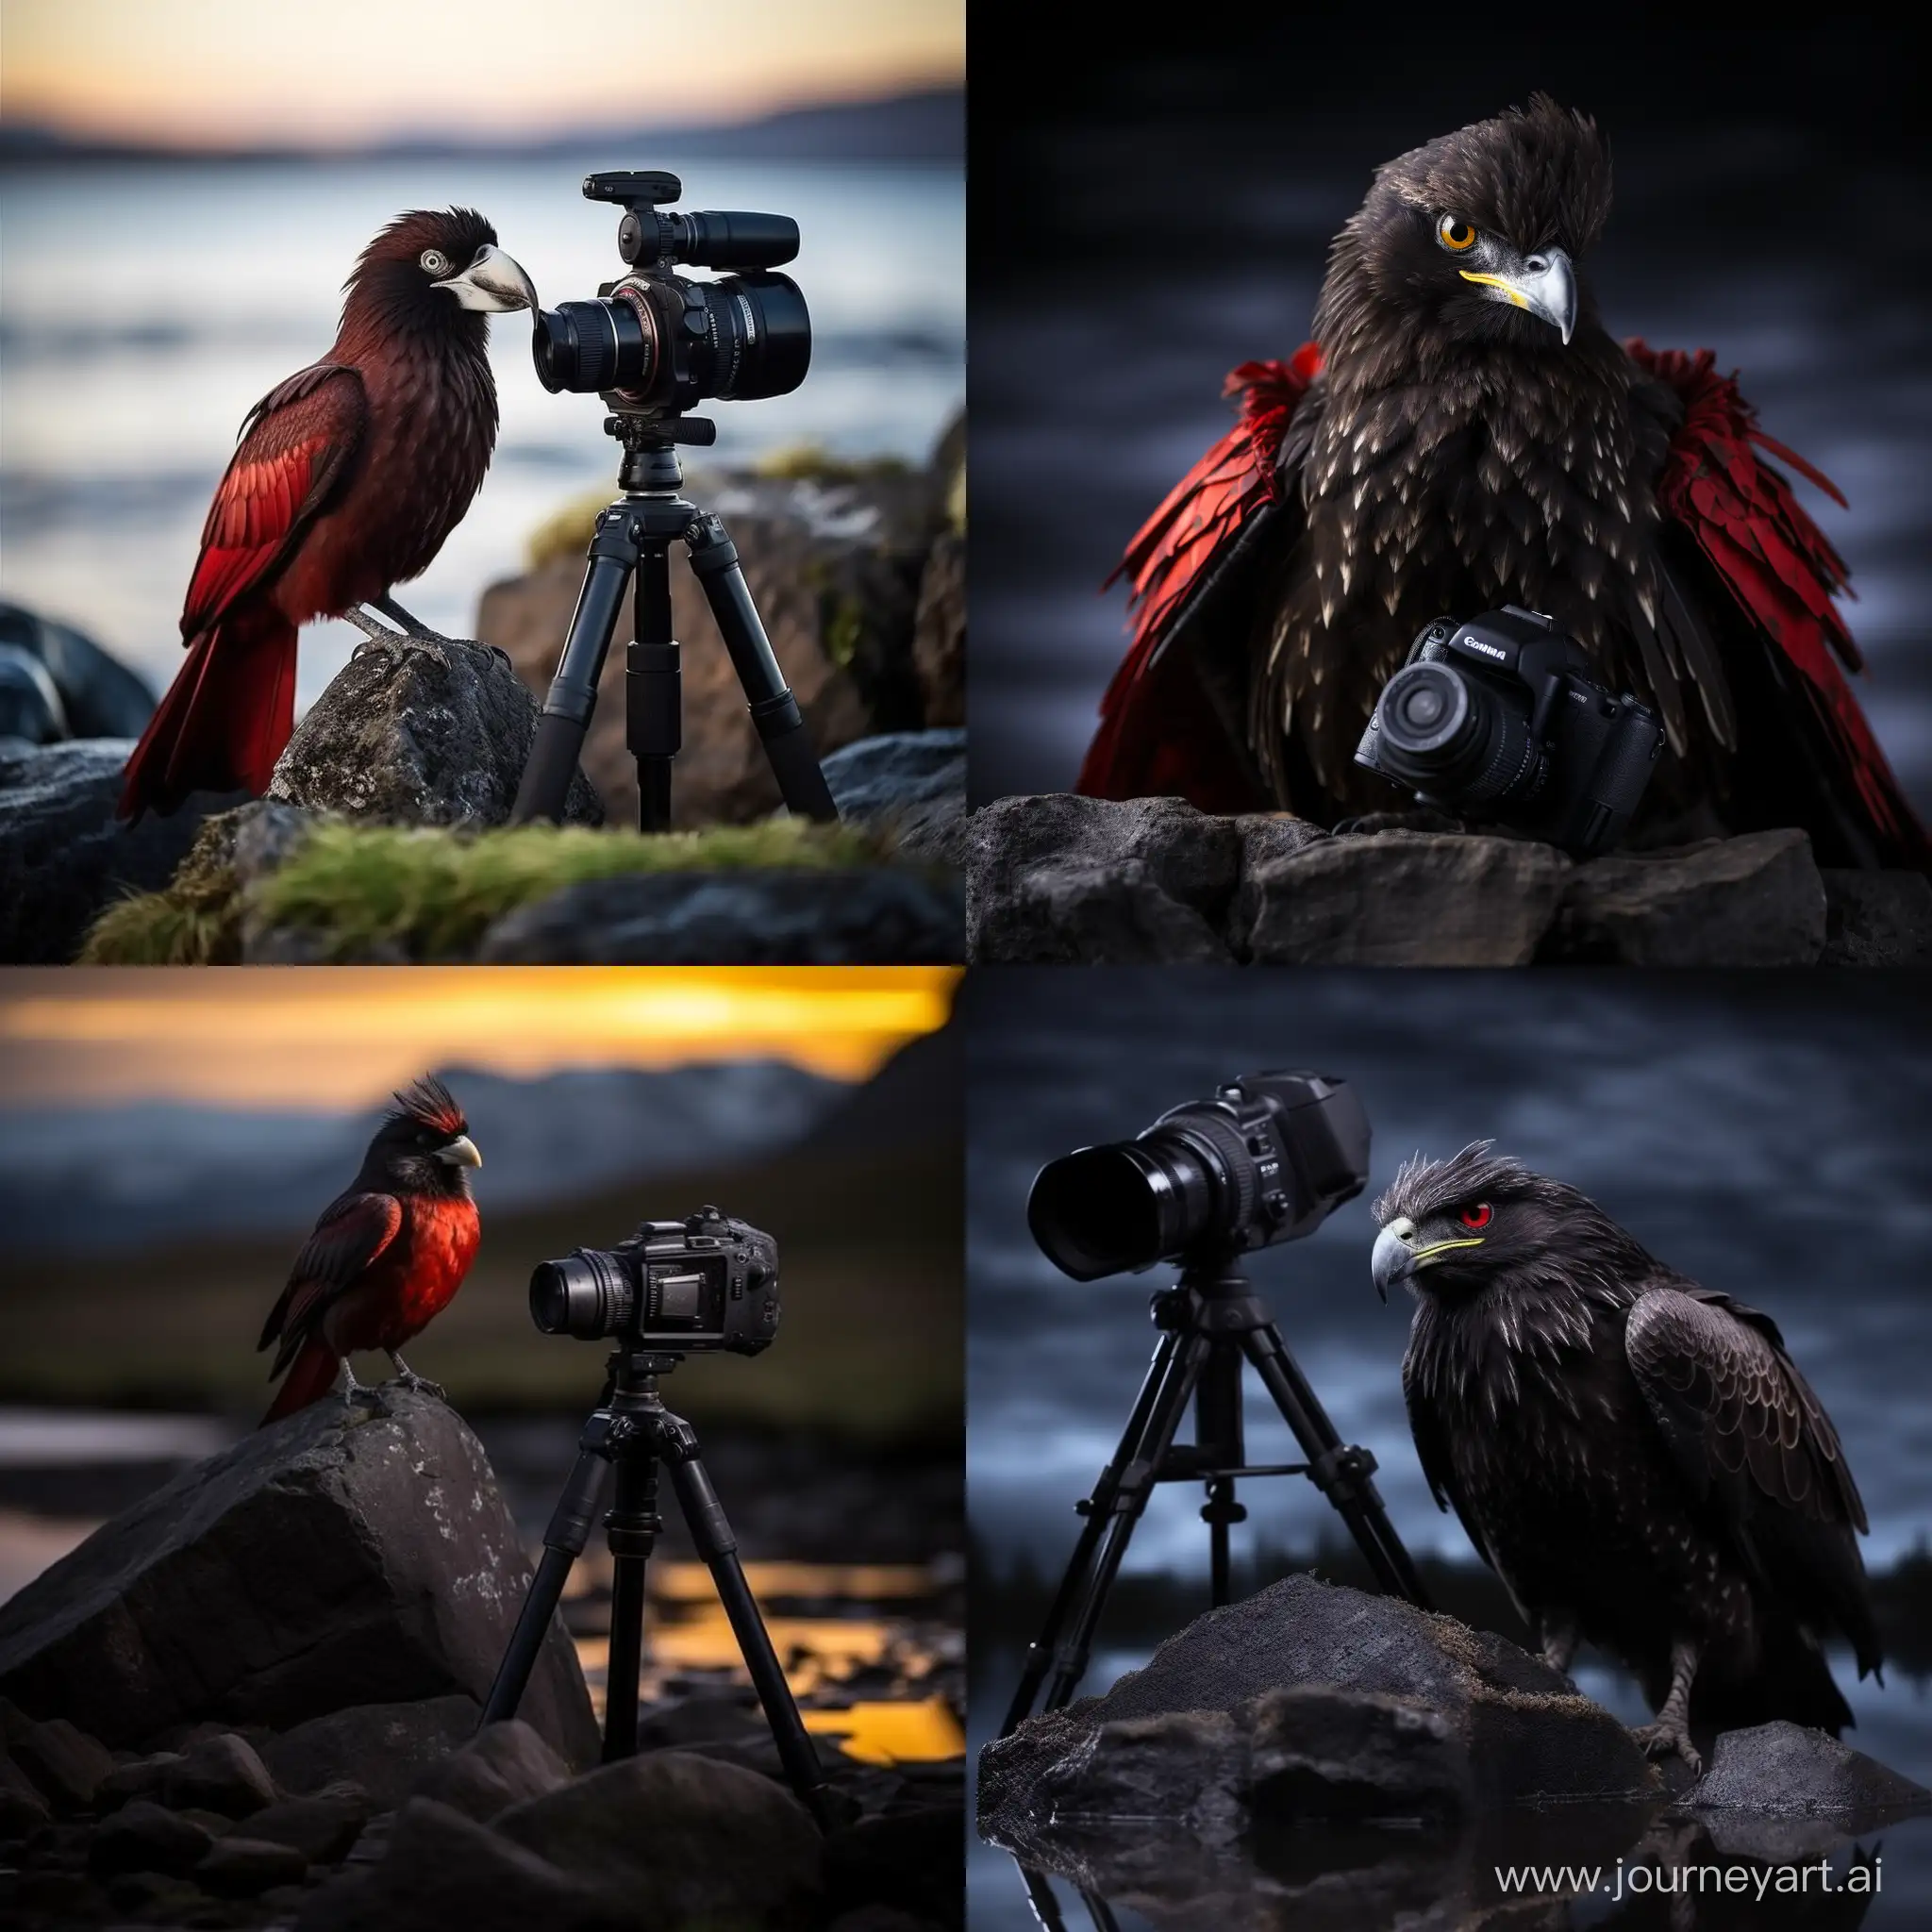 Capture a breathtaking cinematic scene where a majestic cormorant bird perches regally atop a rugged rock formation, resembling a king surveying its kingdom. The bird should be adorned in the iconic Liverpool FC attire, featuring a meticulously detailed Liverpool FC jersey. Envision the moment through the lens of a cinematic 60mm lens, ensuring the composition captures the grandeur of the bird, the rugged beauty of the rock, and the dynamic essence of the Liverpool FC jersey. Pay close attention to lighting, shadows, and textures to achieve a realistic and visually stunning image that seamlessly blends the natural world with the spirit of Liverpool FC. Bring forth a sense of majesty and pride, as if the bird itself is a symbol of the team's strength and triumph. The final image should evoke a cinematic atmosphere that transports viewers into this unique and captivating moment. should wear liverpool football club red jersey